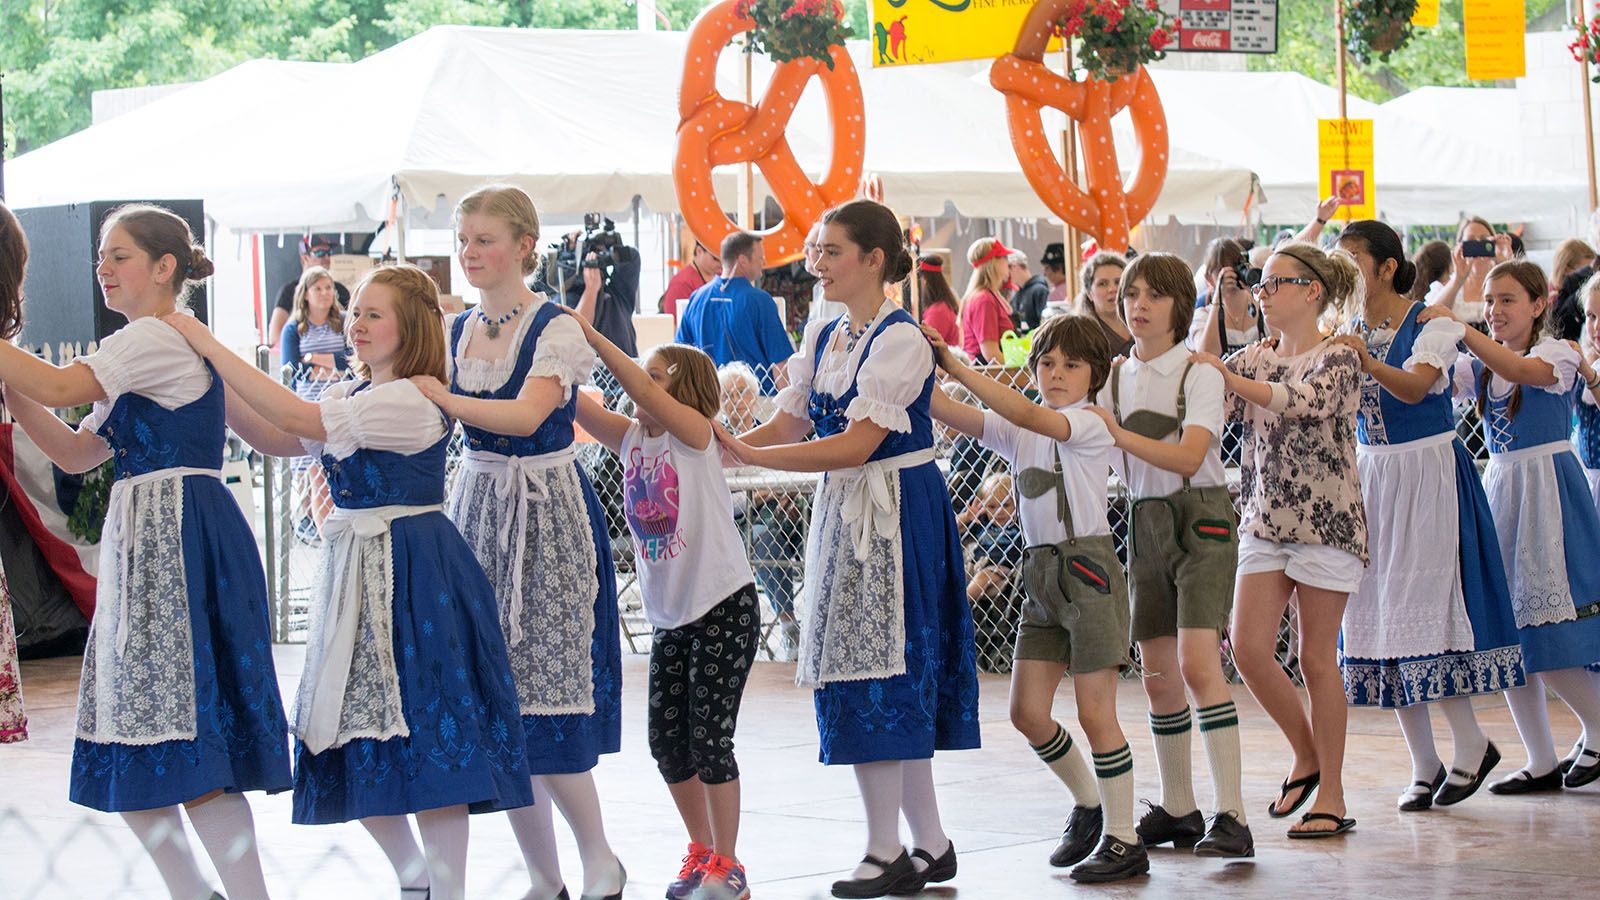 There will be plenty of traditional dancing when Germanfest returns to Headwaters Park.